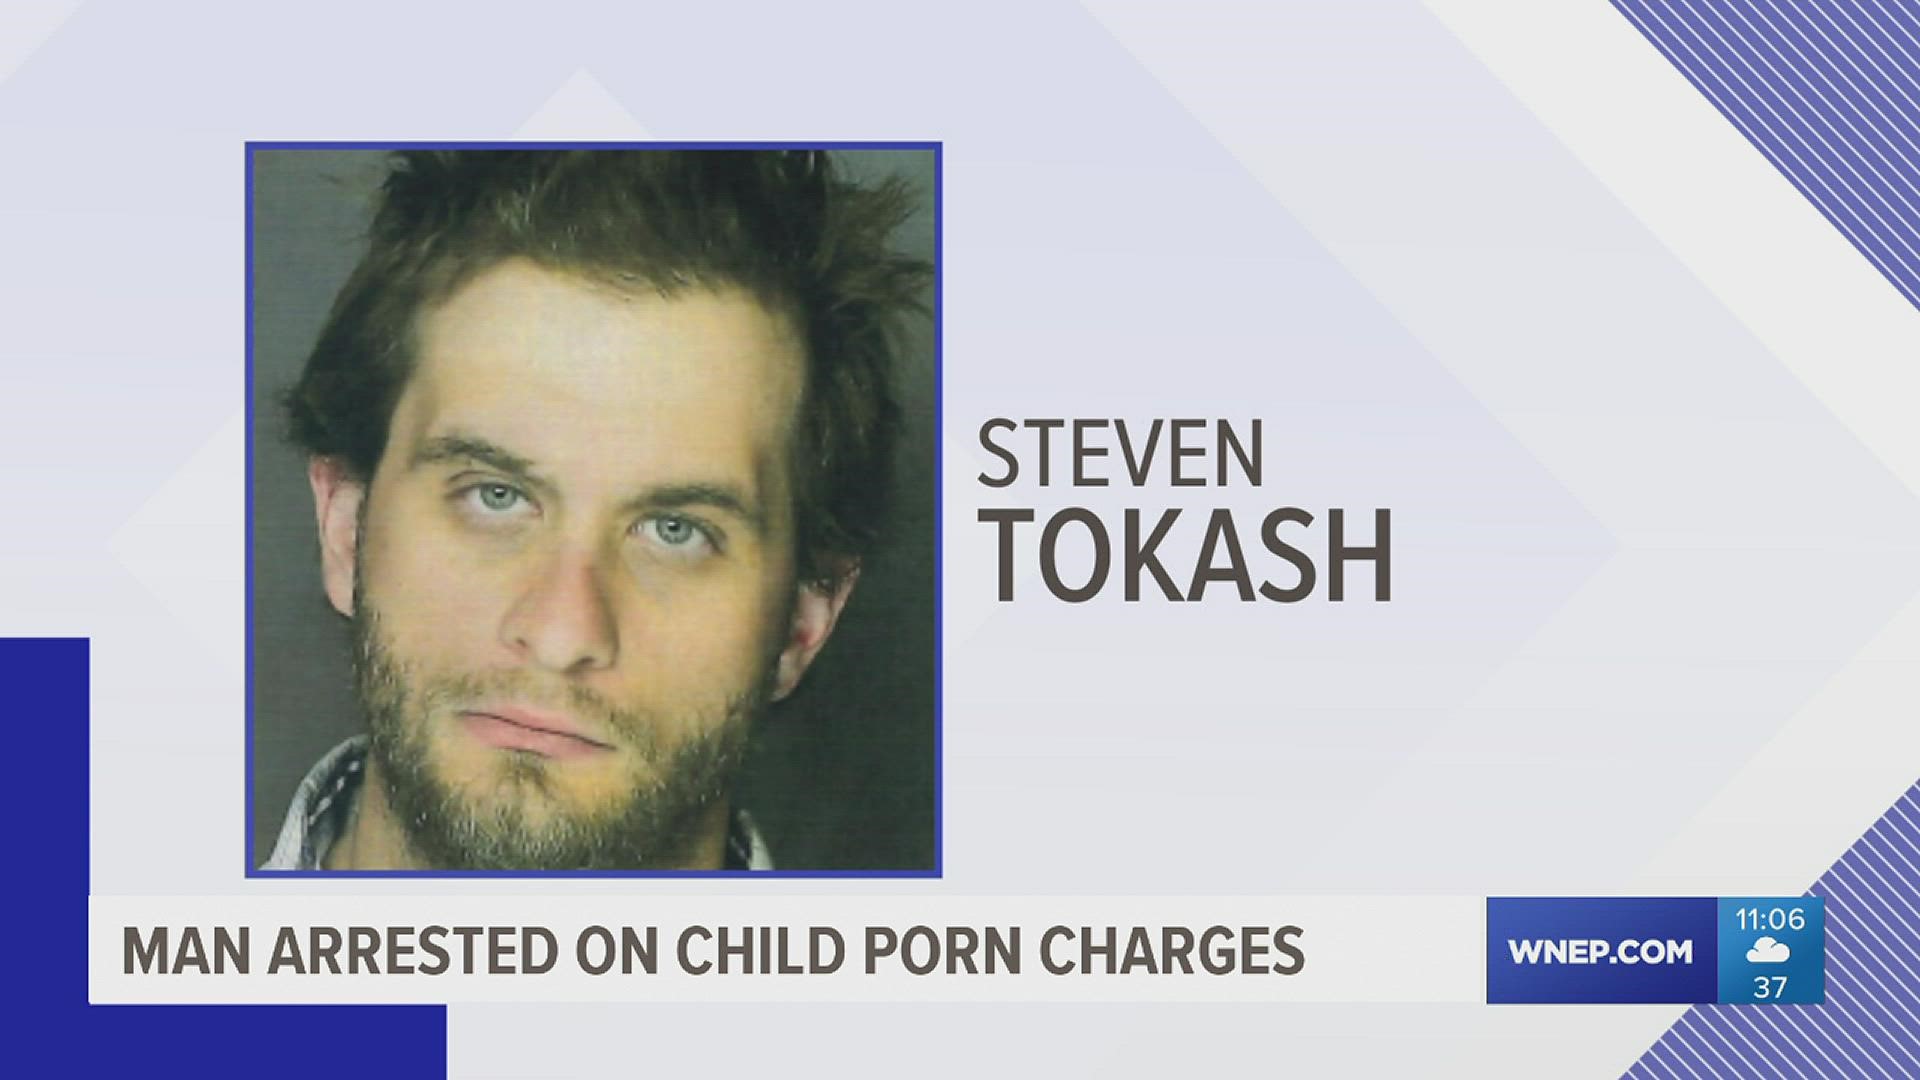 After failing to post $150,000 secured bail Steven Tokash is locked up in Luzerne County.